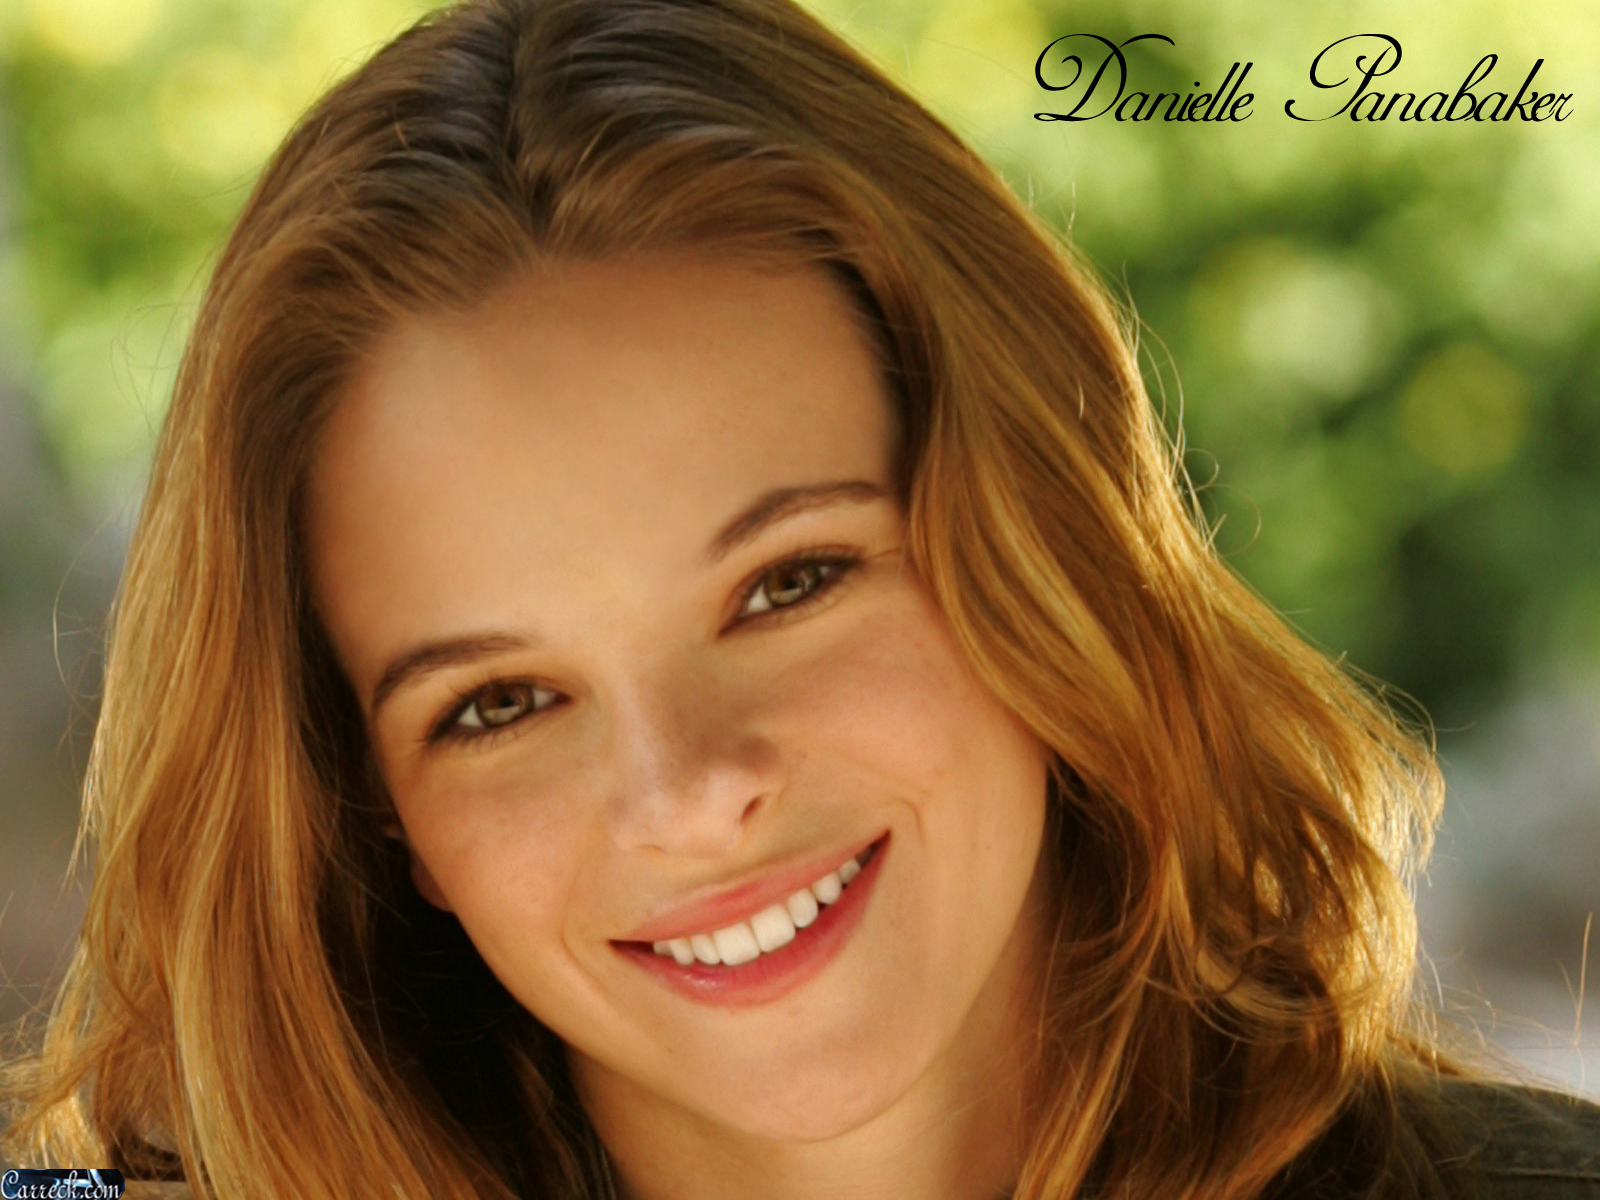 Life: People: Danielle Panabaker (1987- )